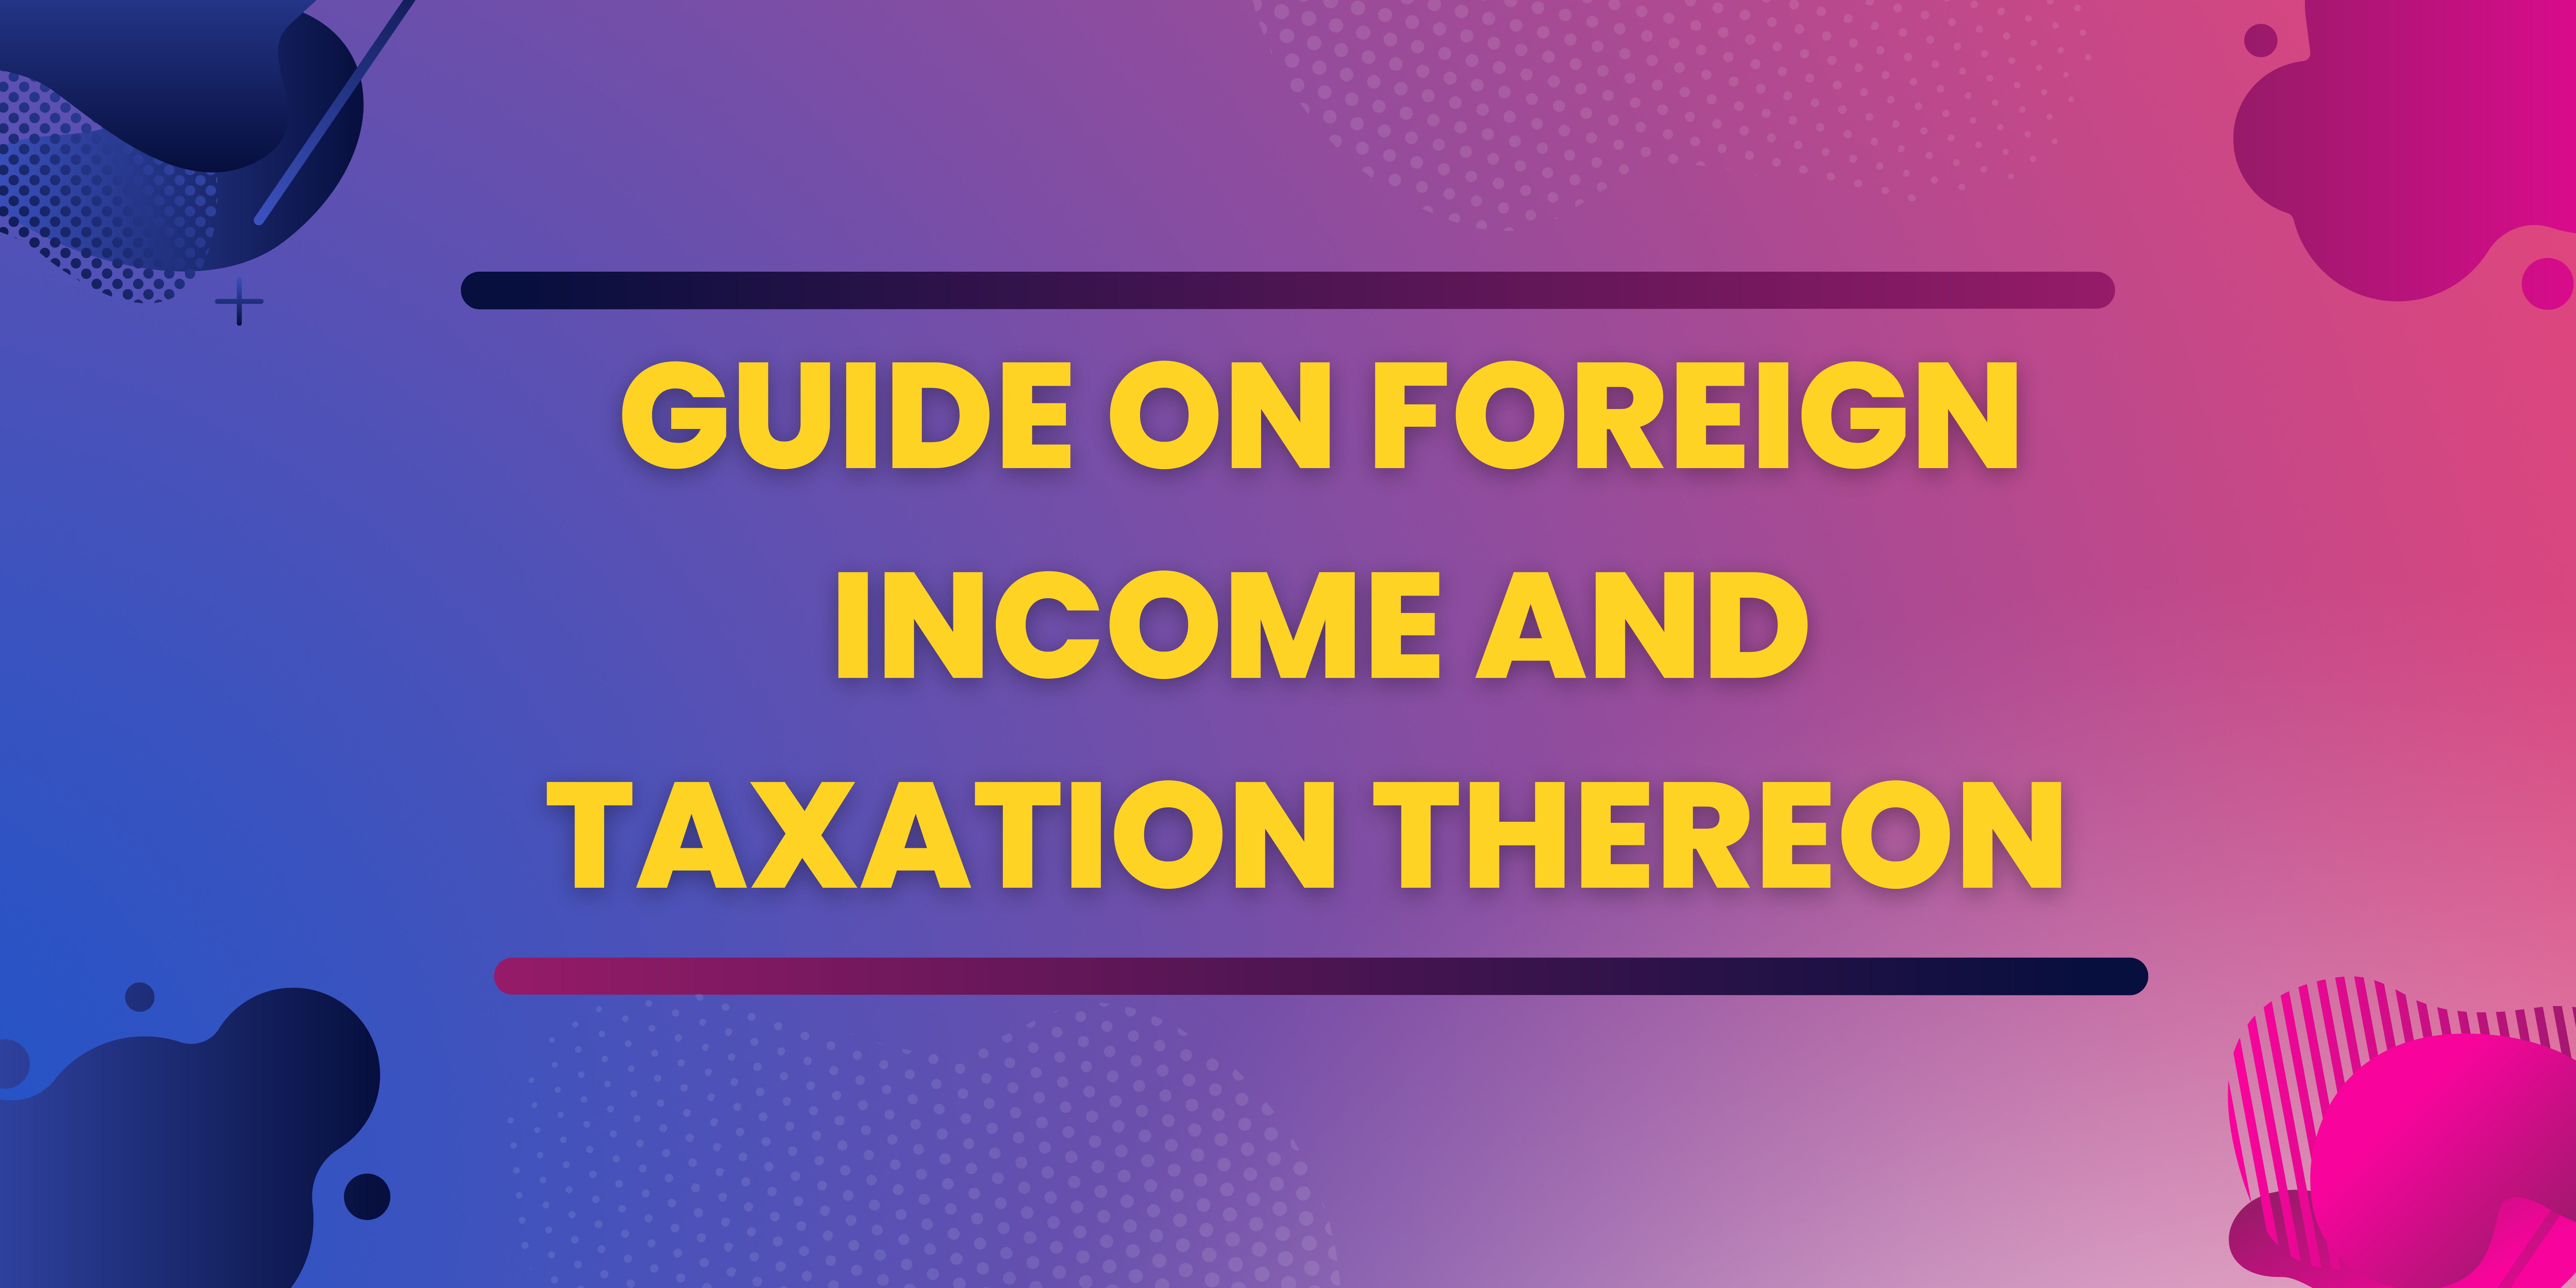 Guide on Foreign Income and Taxation thereon 